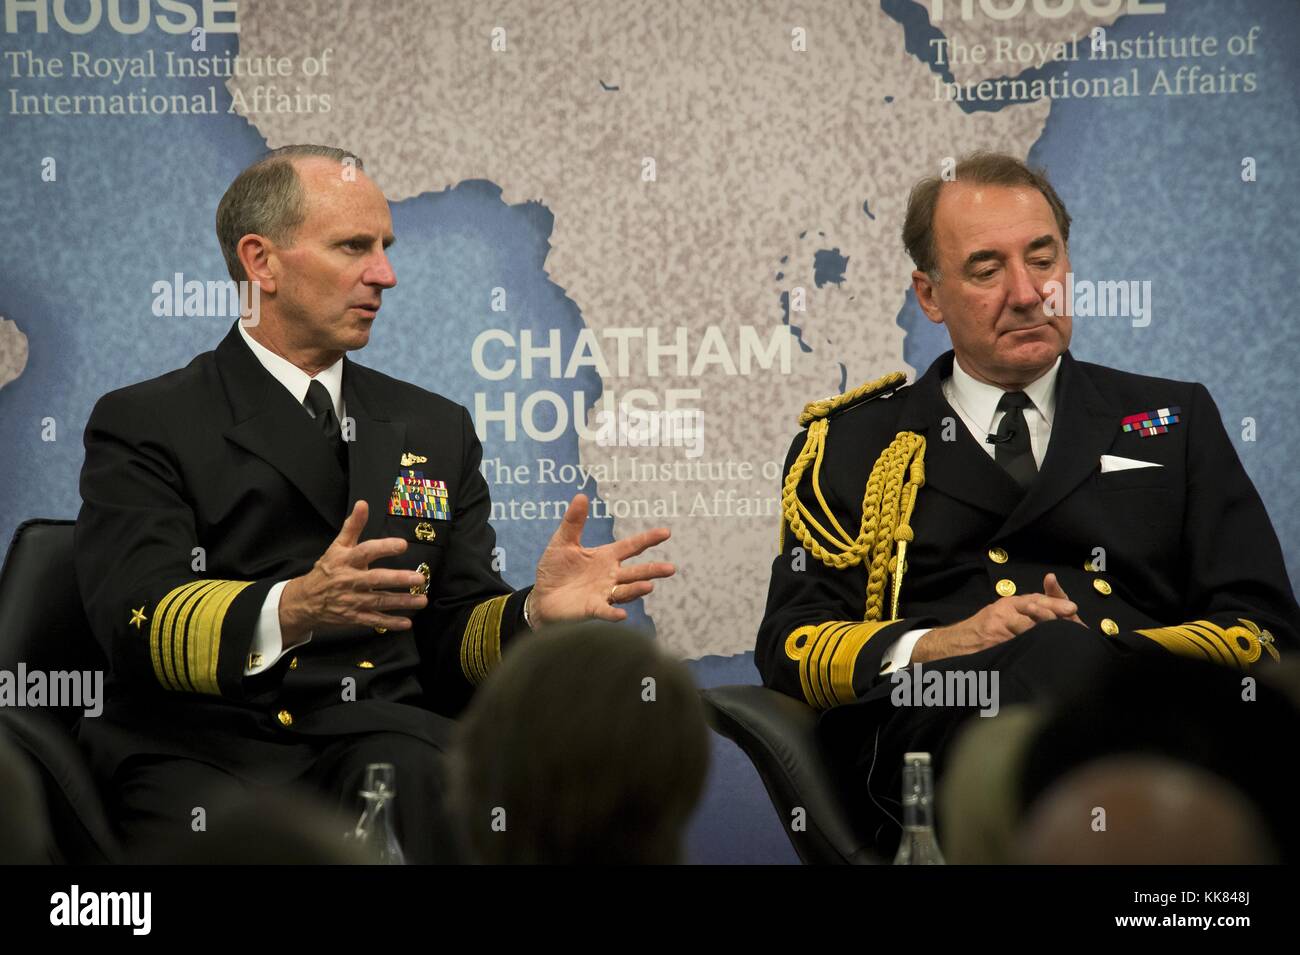 Chief of Naval Operations CNO Admiral Jonathan Greenert and First Sea Lord of the Royal Navy Admiral Sir George Zambellas participate in a moderated talk focused on the future of the British-American naval alliance at Chatham House, the Royal Institute of International Affairs, London. Image courtesy Mass Communication Specialist 1st Class Nathan Laird/US Navy, United Kingdom, 2015. Stock Photo